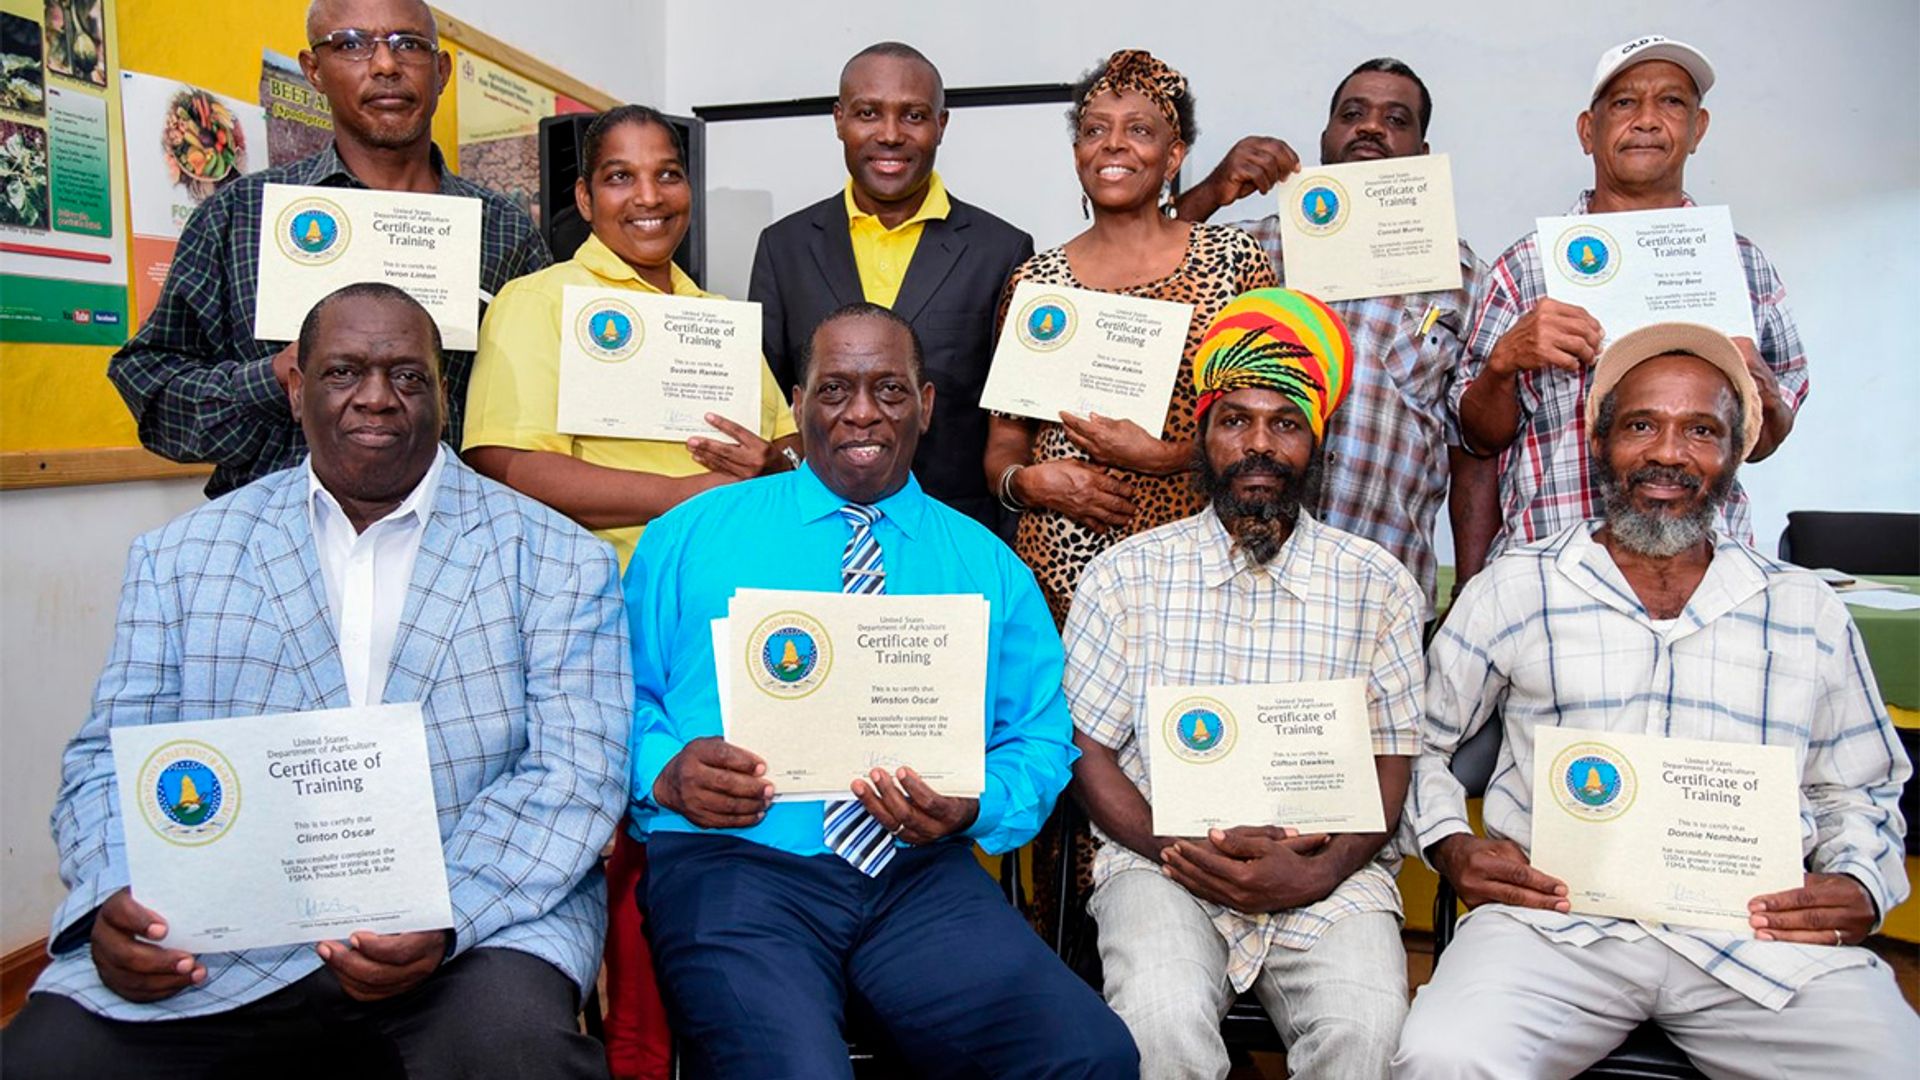 Image of participants holding certificates of completion following a workshop